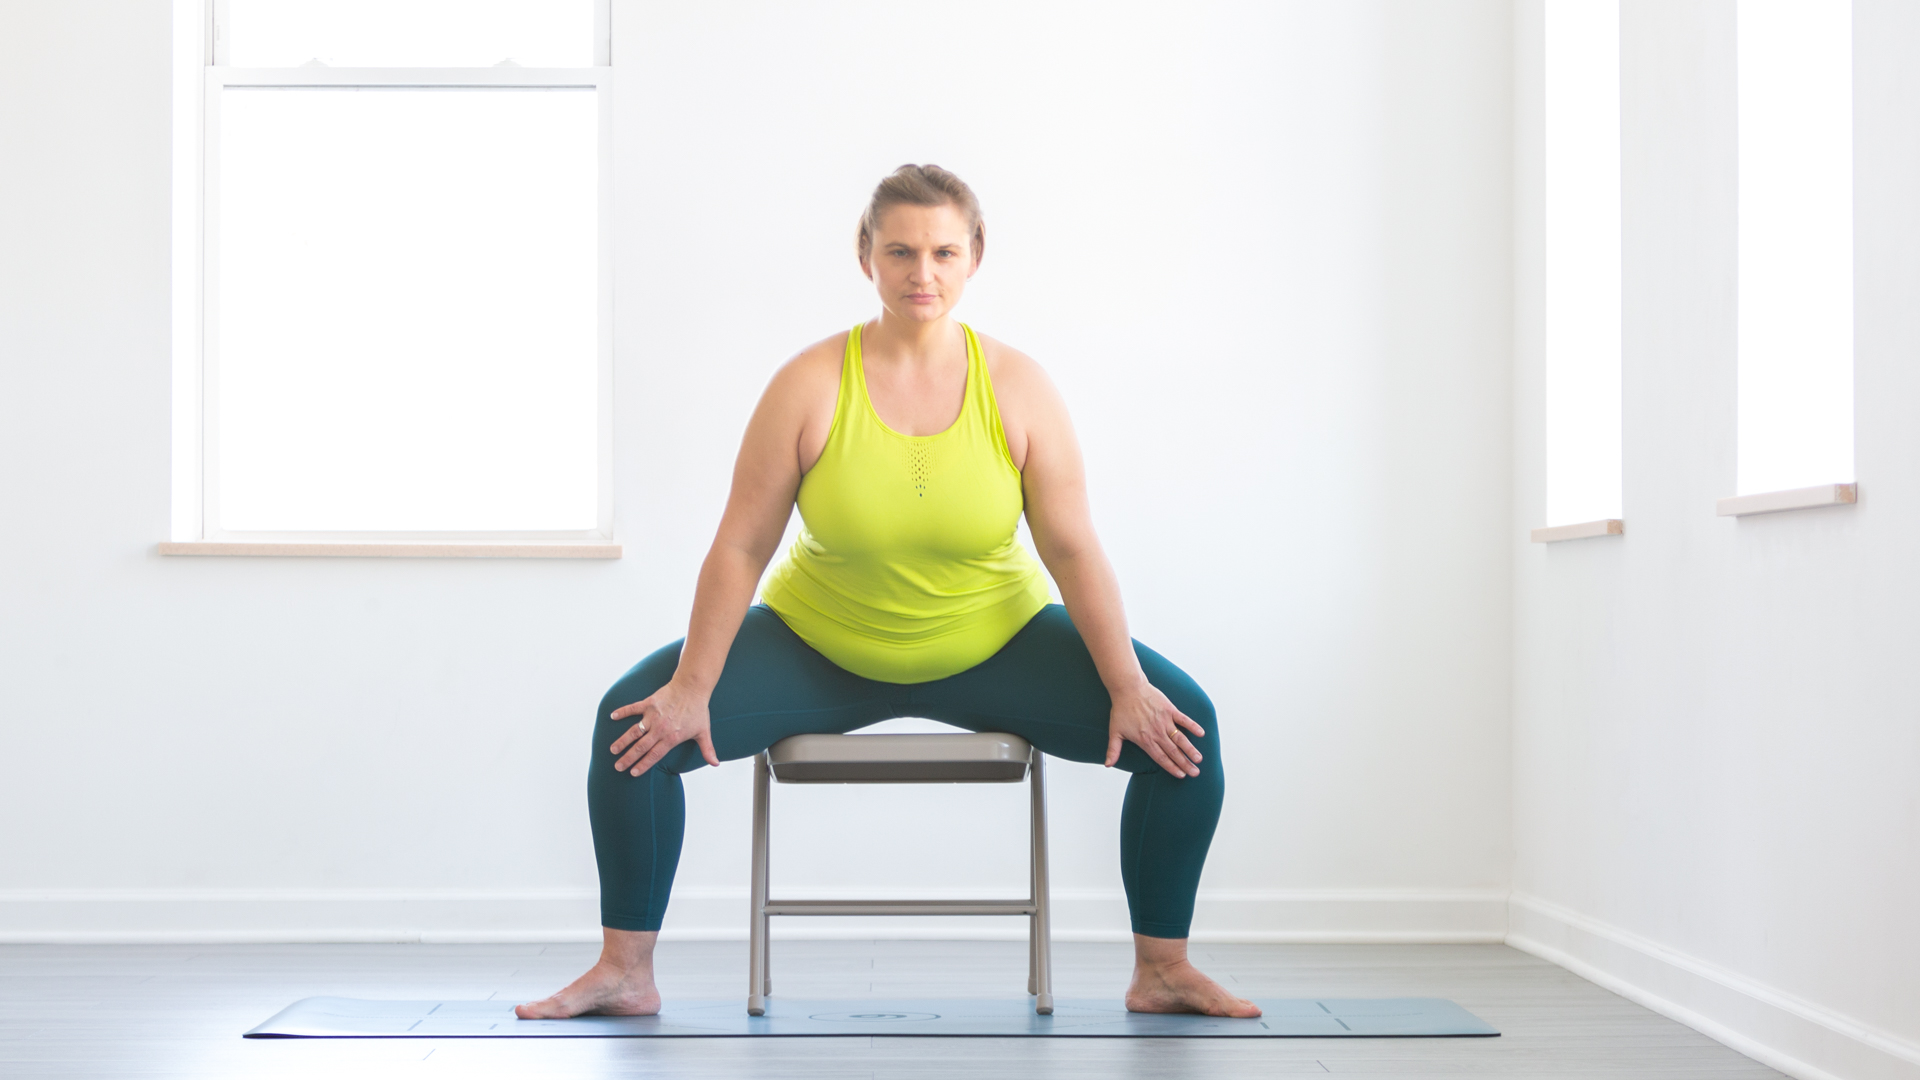 Chair Yoga Standing Pose for Core Strength and Balance Hello, fellow Dharma  Bums! This week, I'm sharing a chair yoga standing pose to help you improve  your core strength and balance. Holding